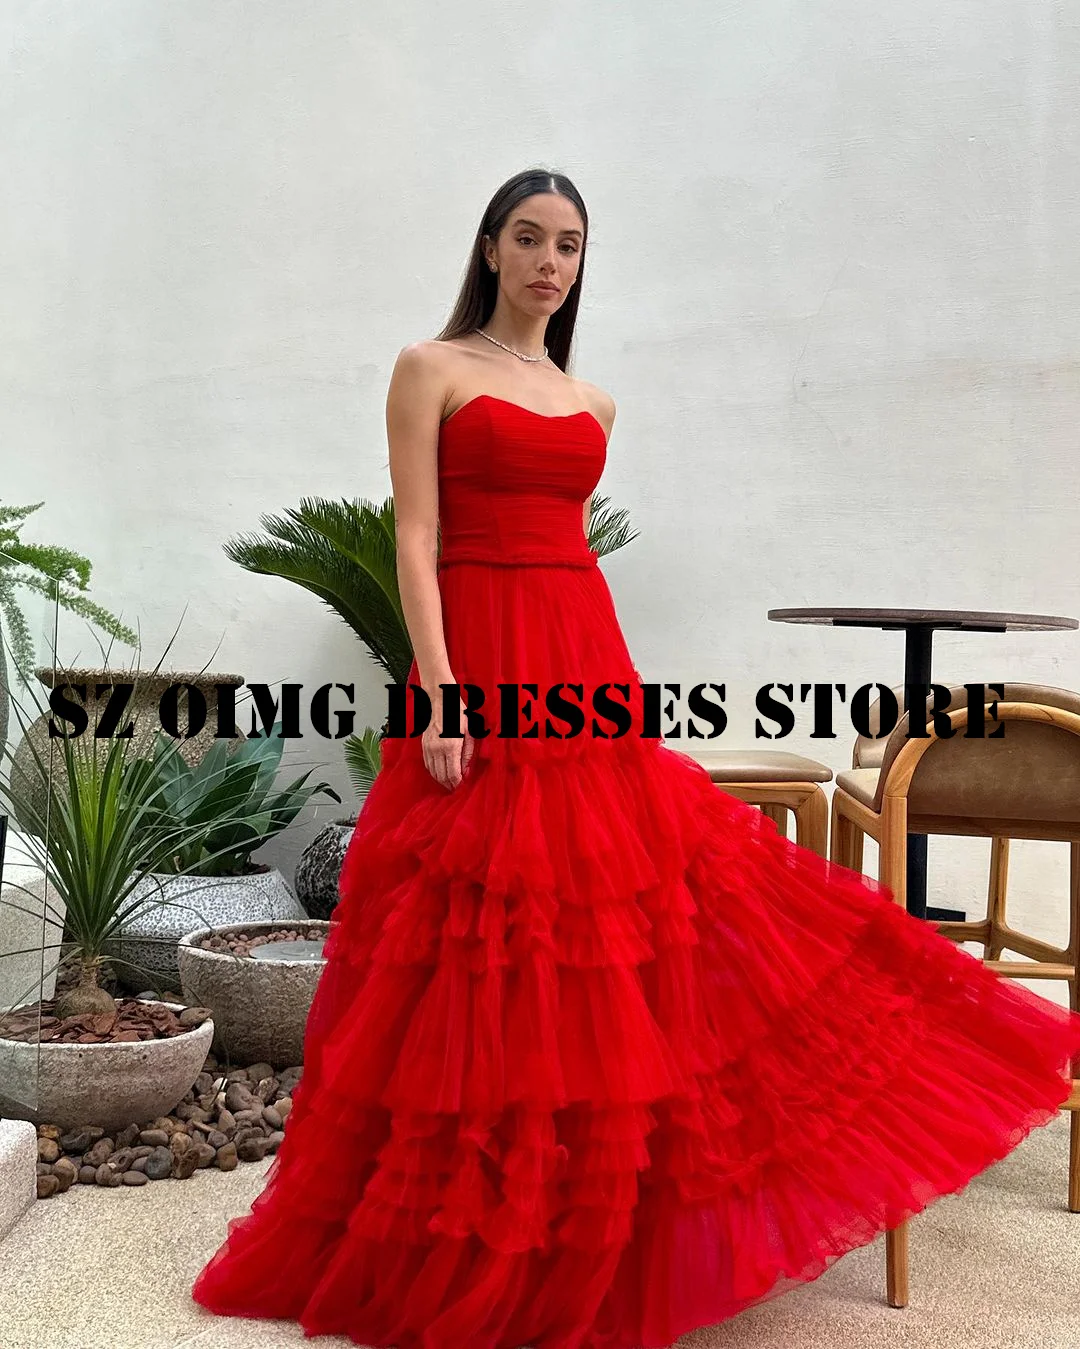 

OIMG New Design Tulle Simple Prom Dresses Arabic Women Ruched Strapless Tiered A-Line Red Evening Gowns Formal Party Dress